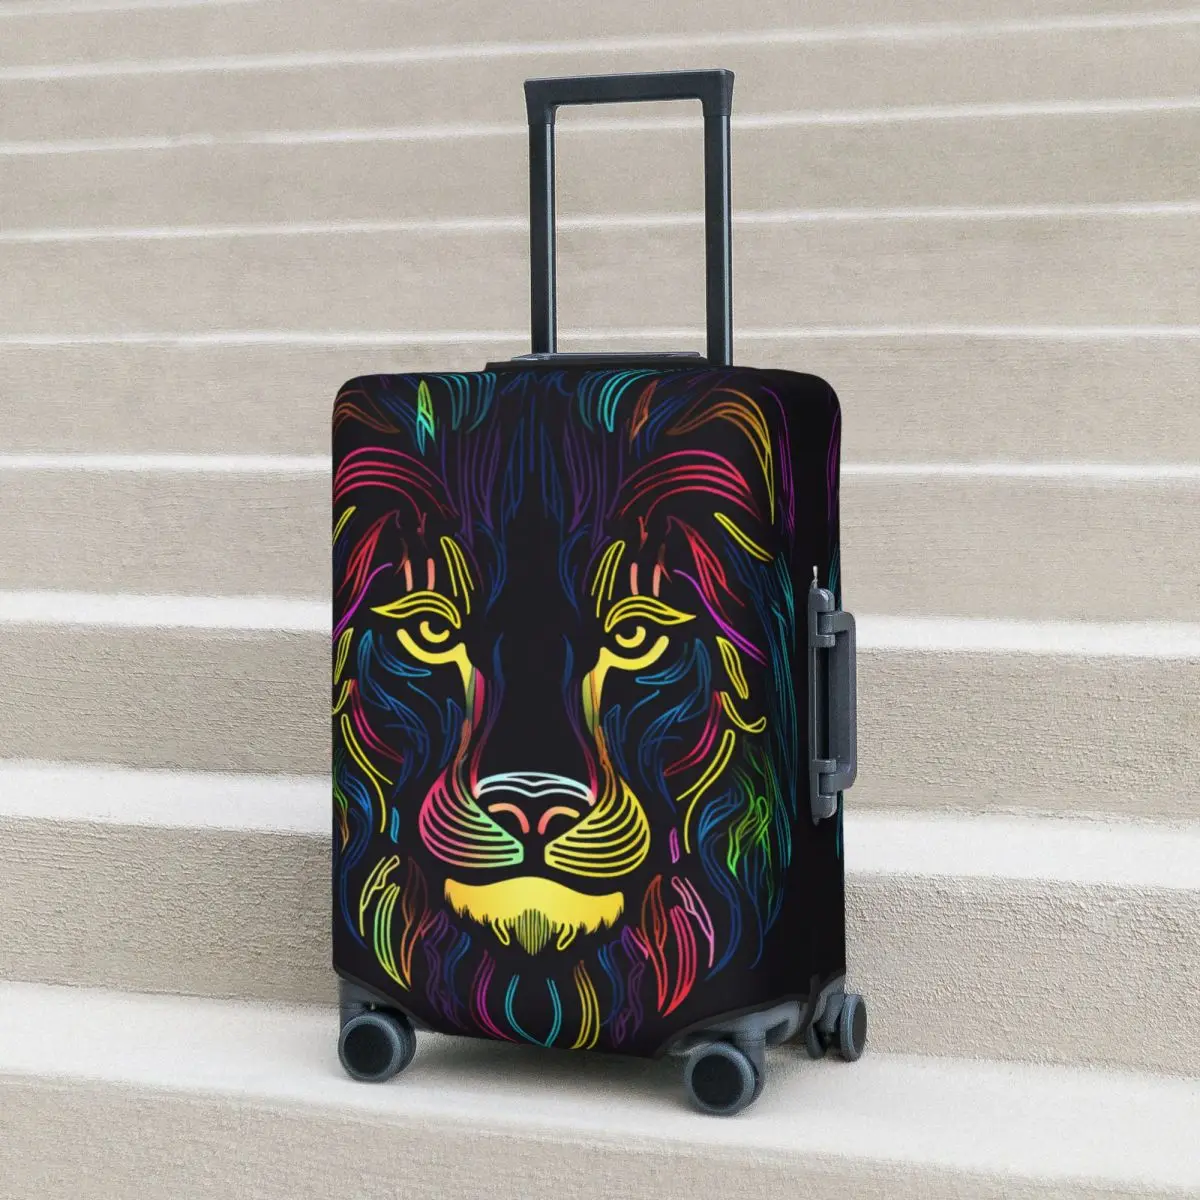 

Lion Suitcase Cover Minimalist Line Art Holiday Cruise Trip Practical Luggage Accesories Protection